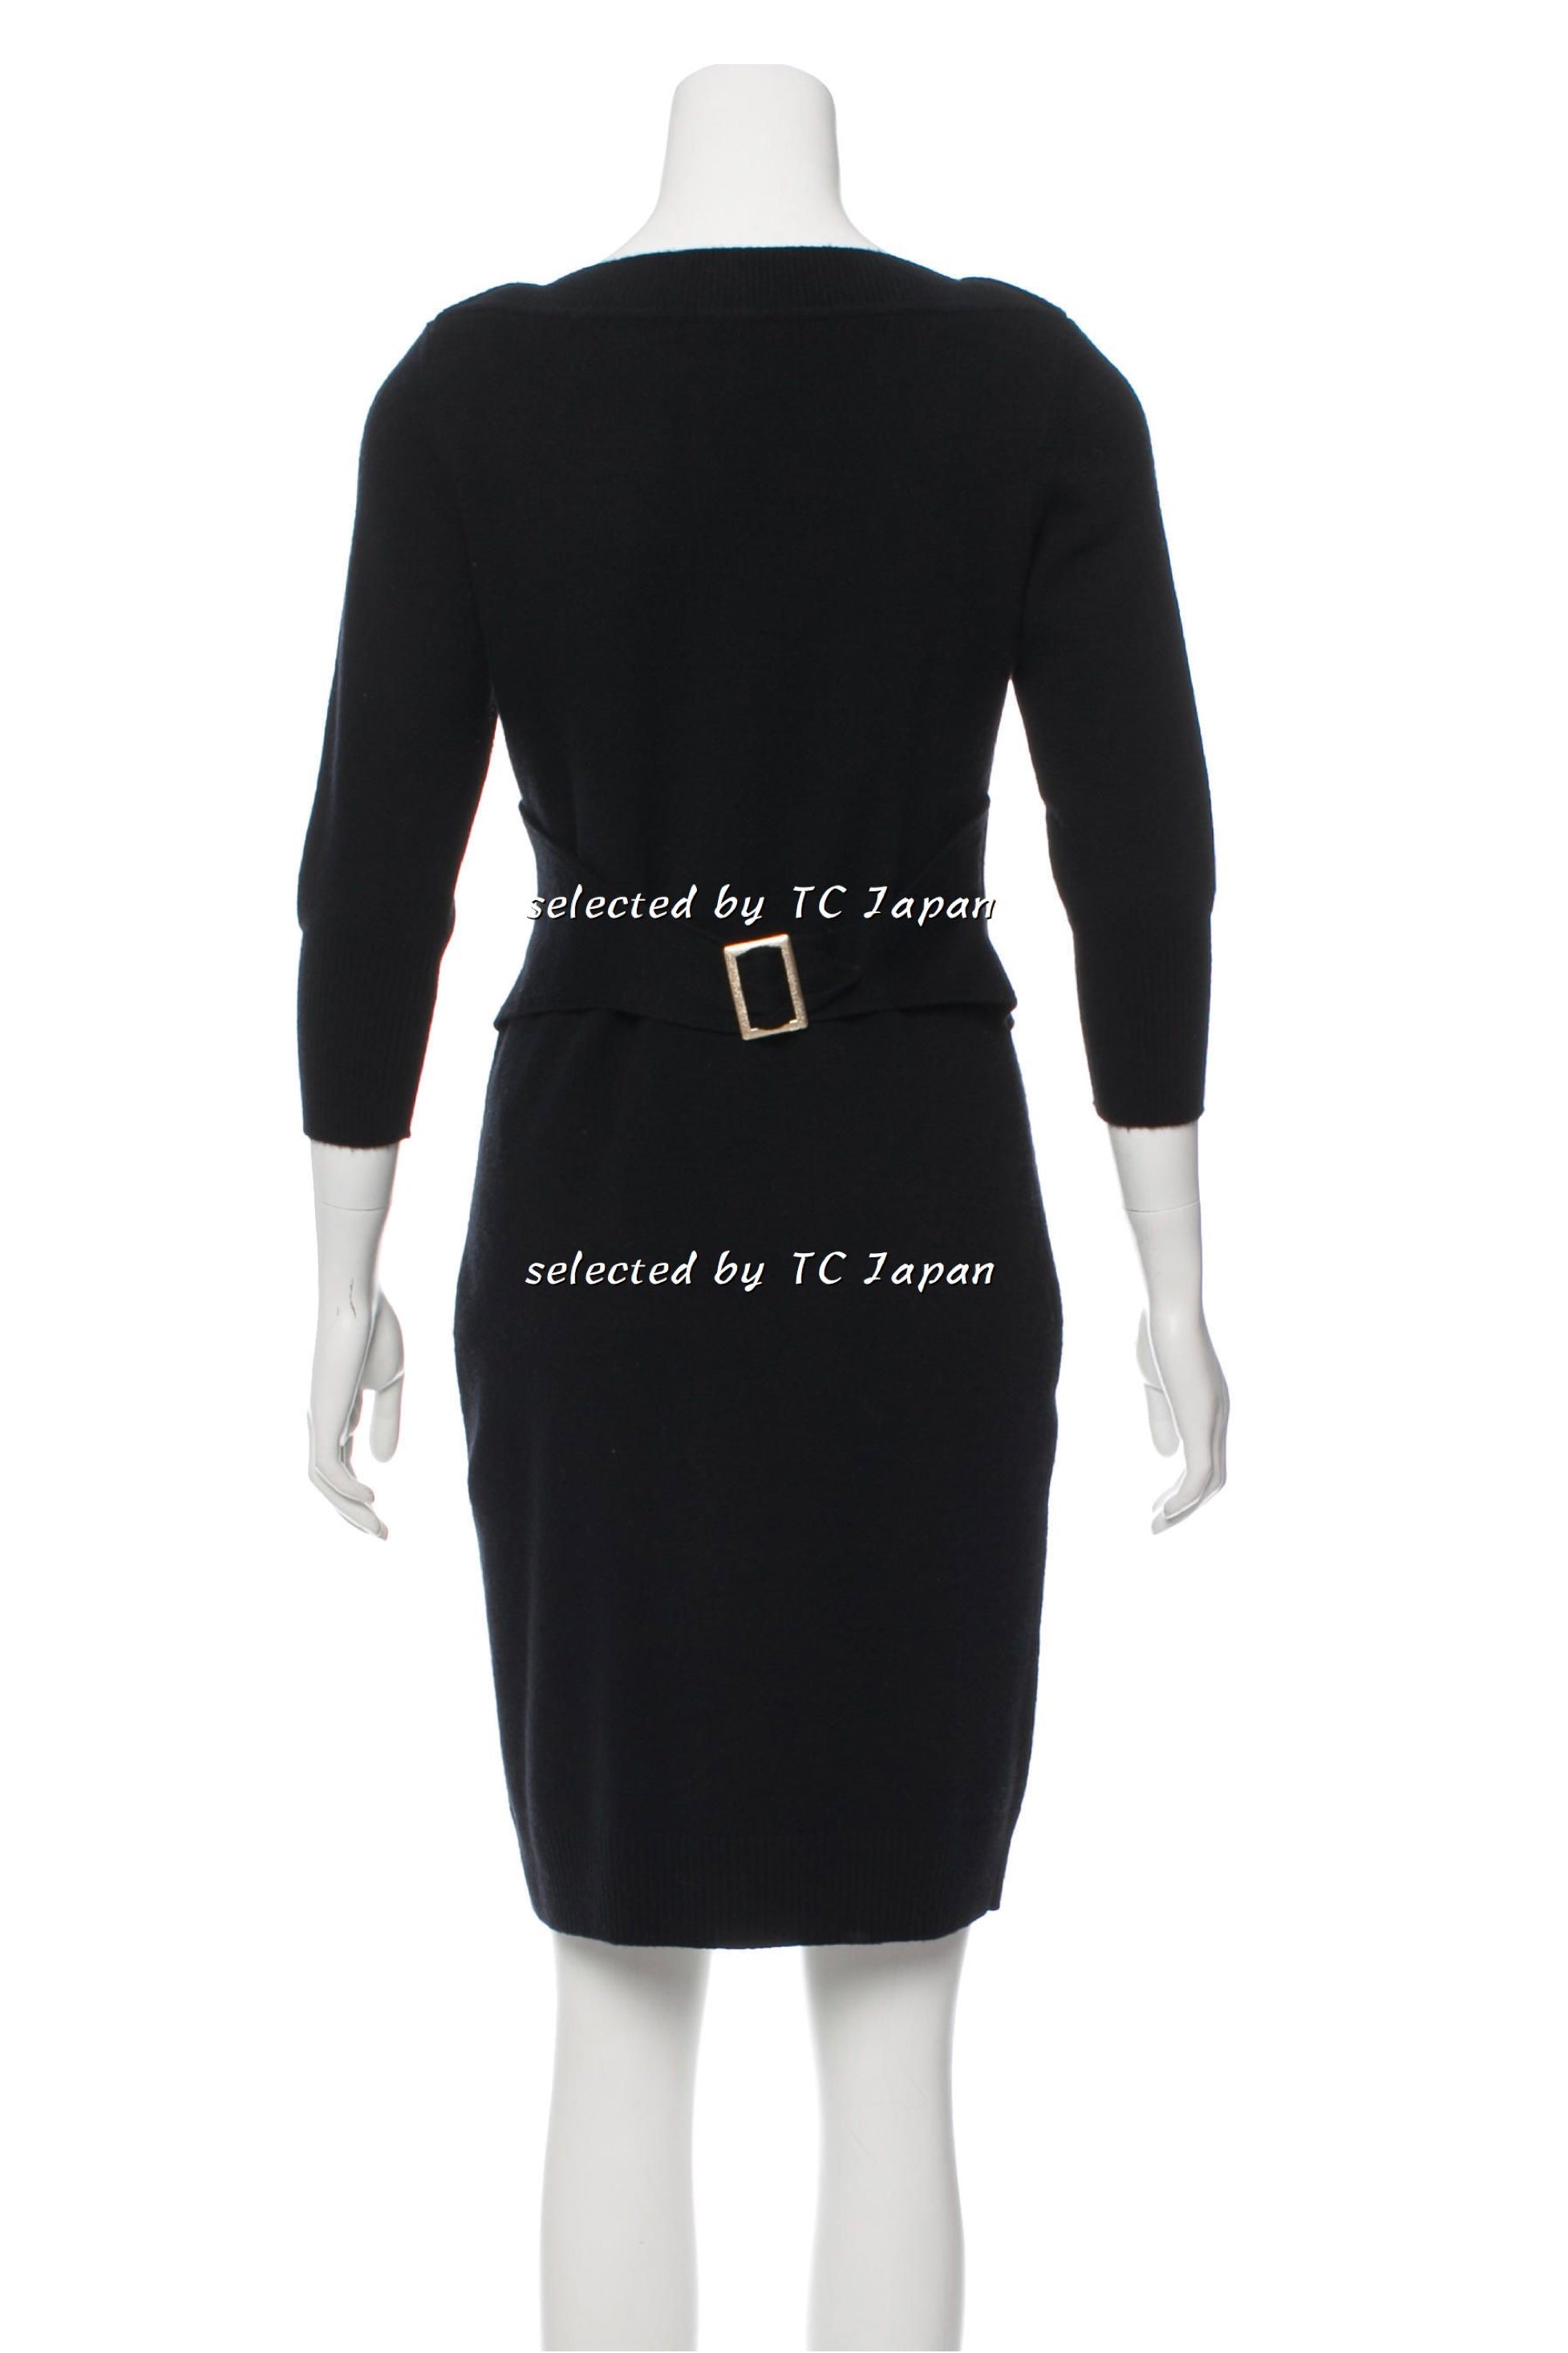 CHANEL 09A Black or Grey Belted Knit Wool Cashmere Dress 38 シャネル  ウール・カシミア・ワンピース